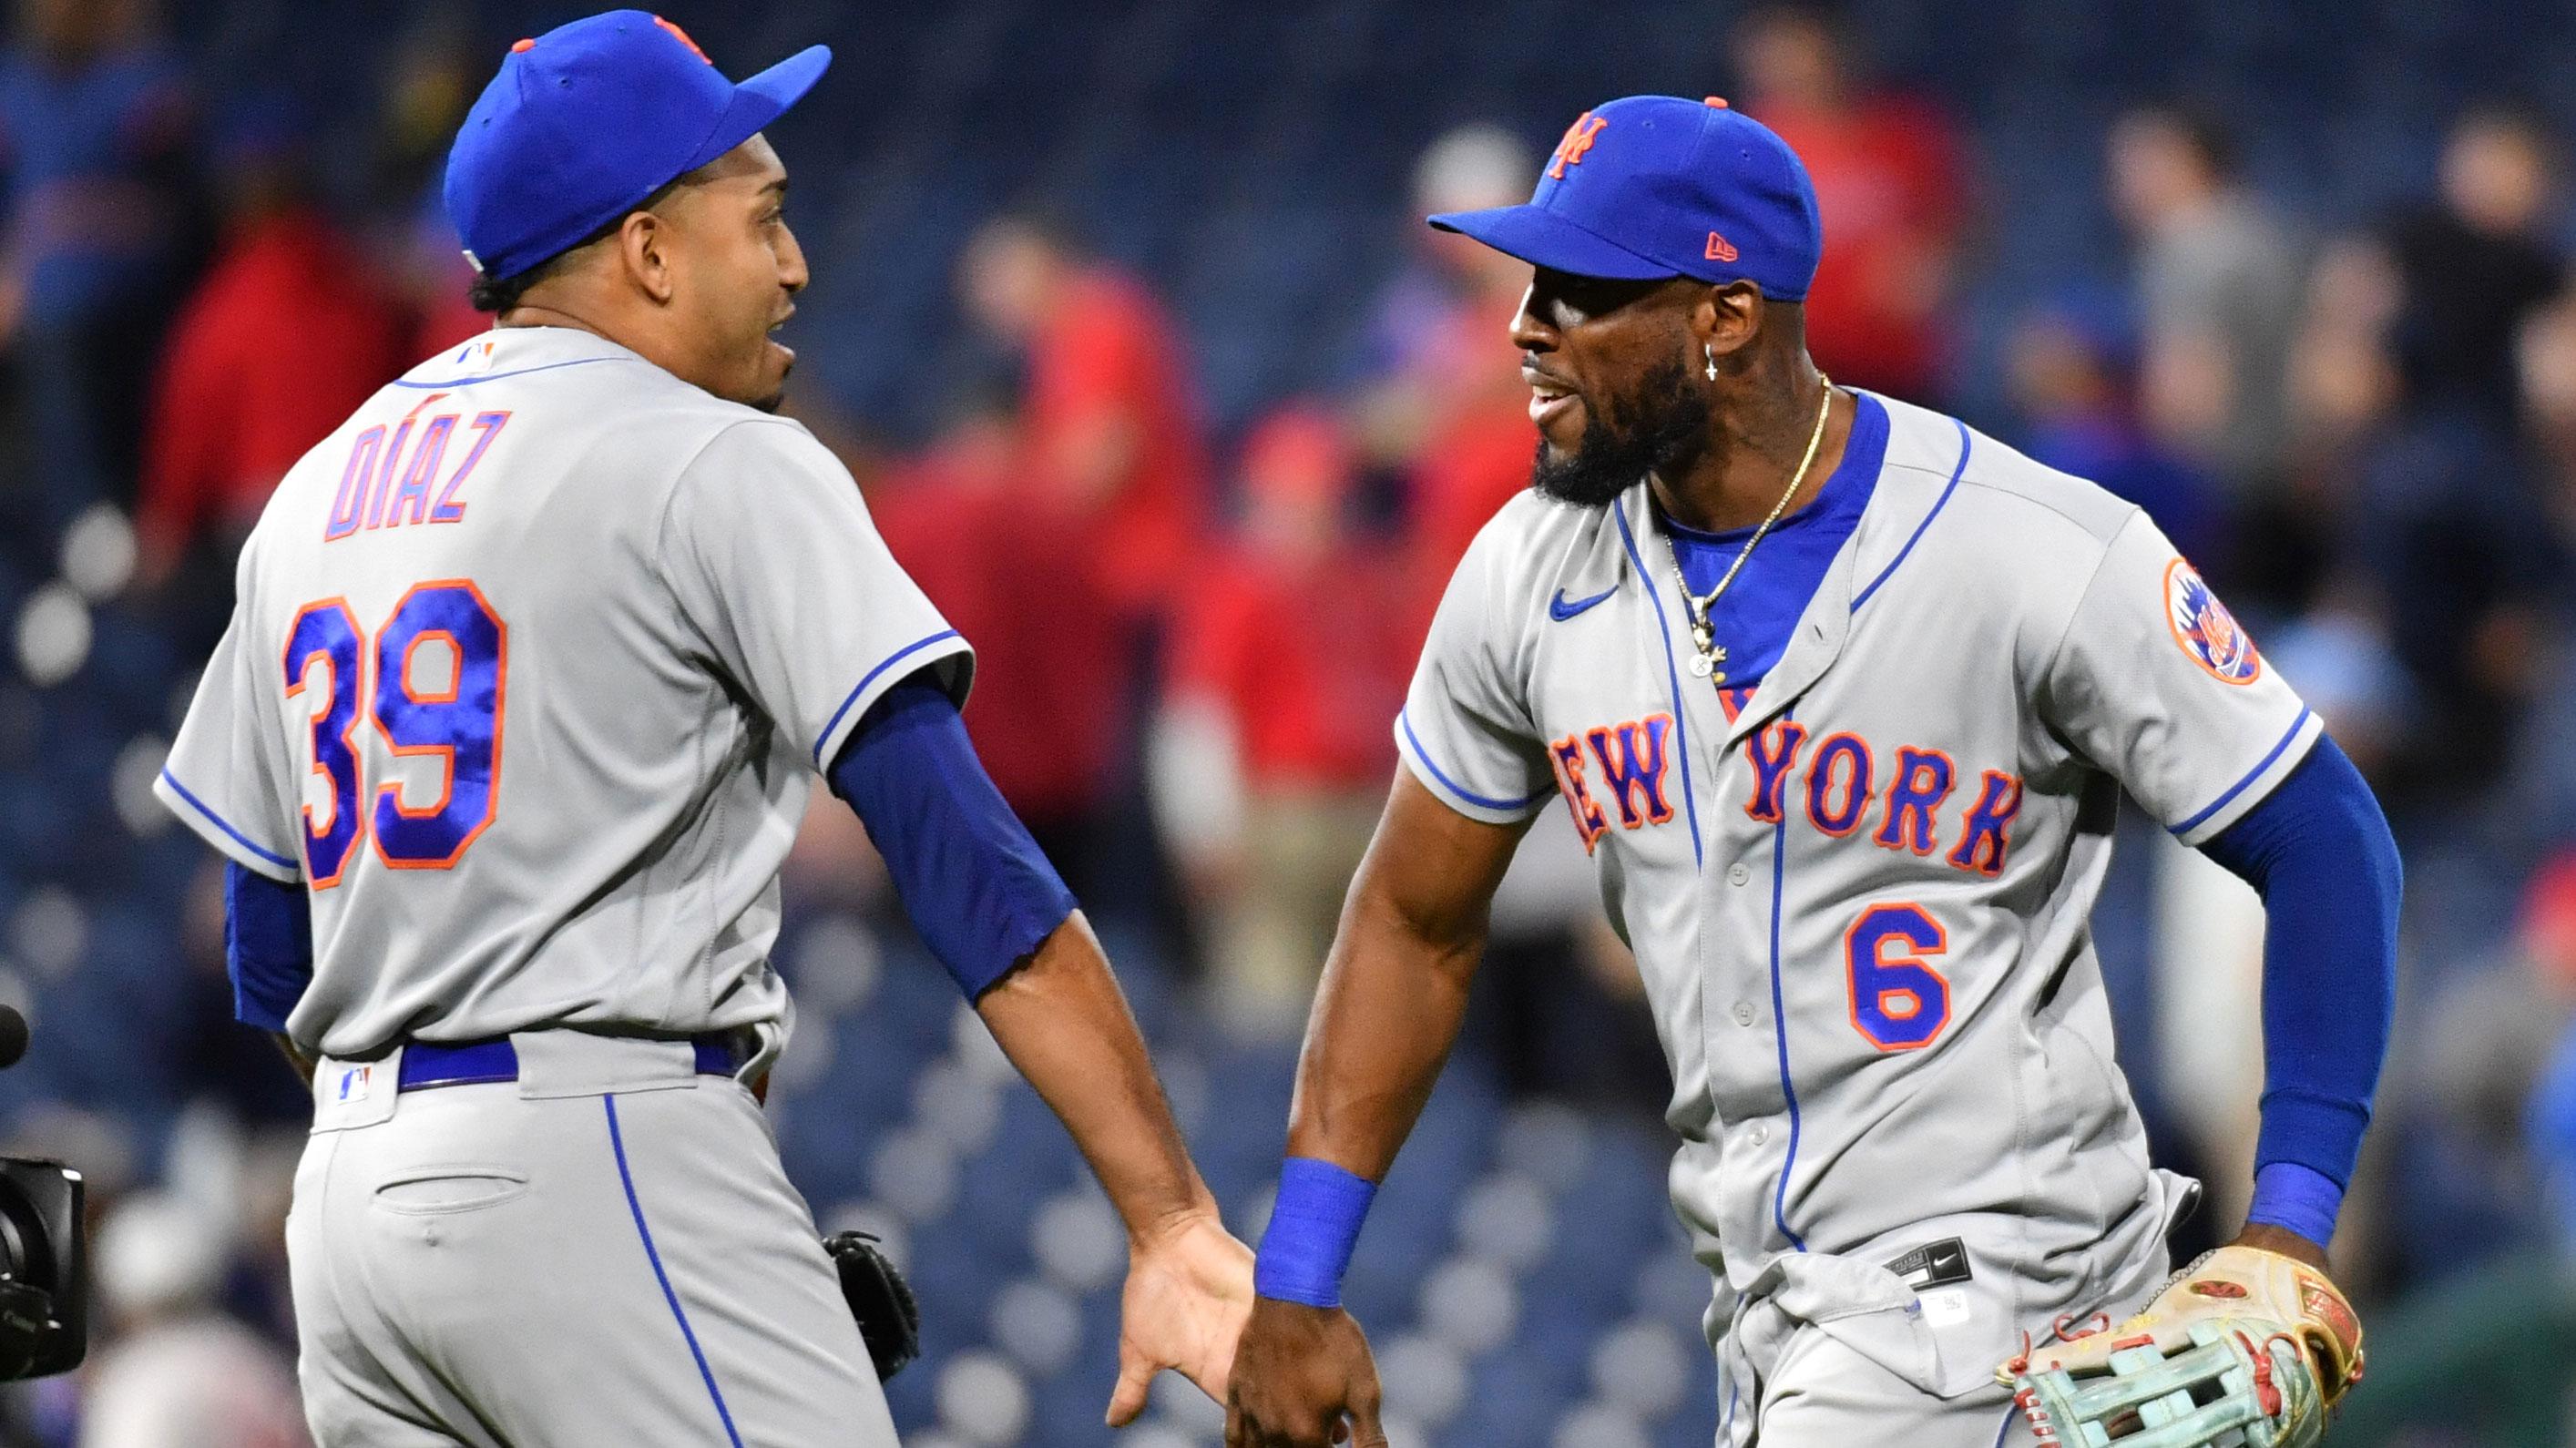 May 5, 2022; Philadelphia, Pennsylvania, USA; New York Mets relief pitcher Edwin Diaz (39) and right fielder Starling Marte (6) celebrate win against the Philadelphia Phillies at Citizens Bank Park. / Eric Hartline-USA TODAY Sports